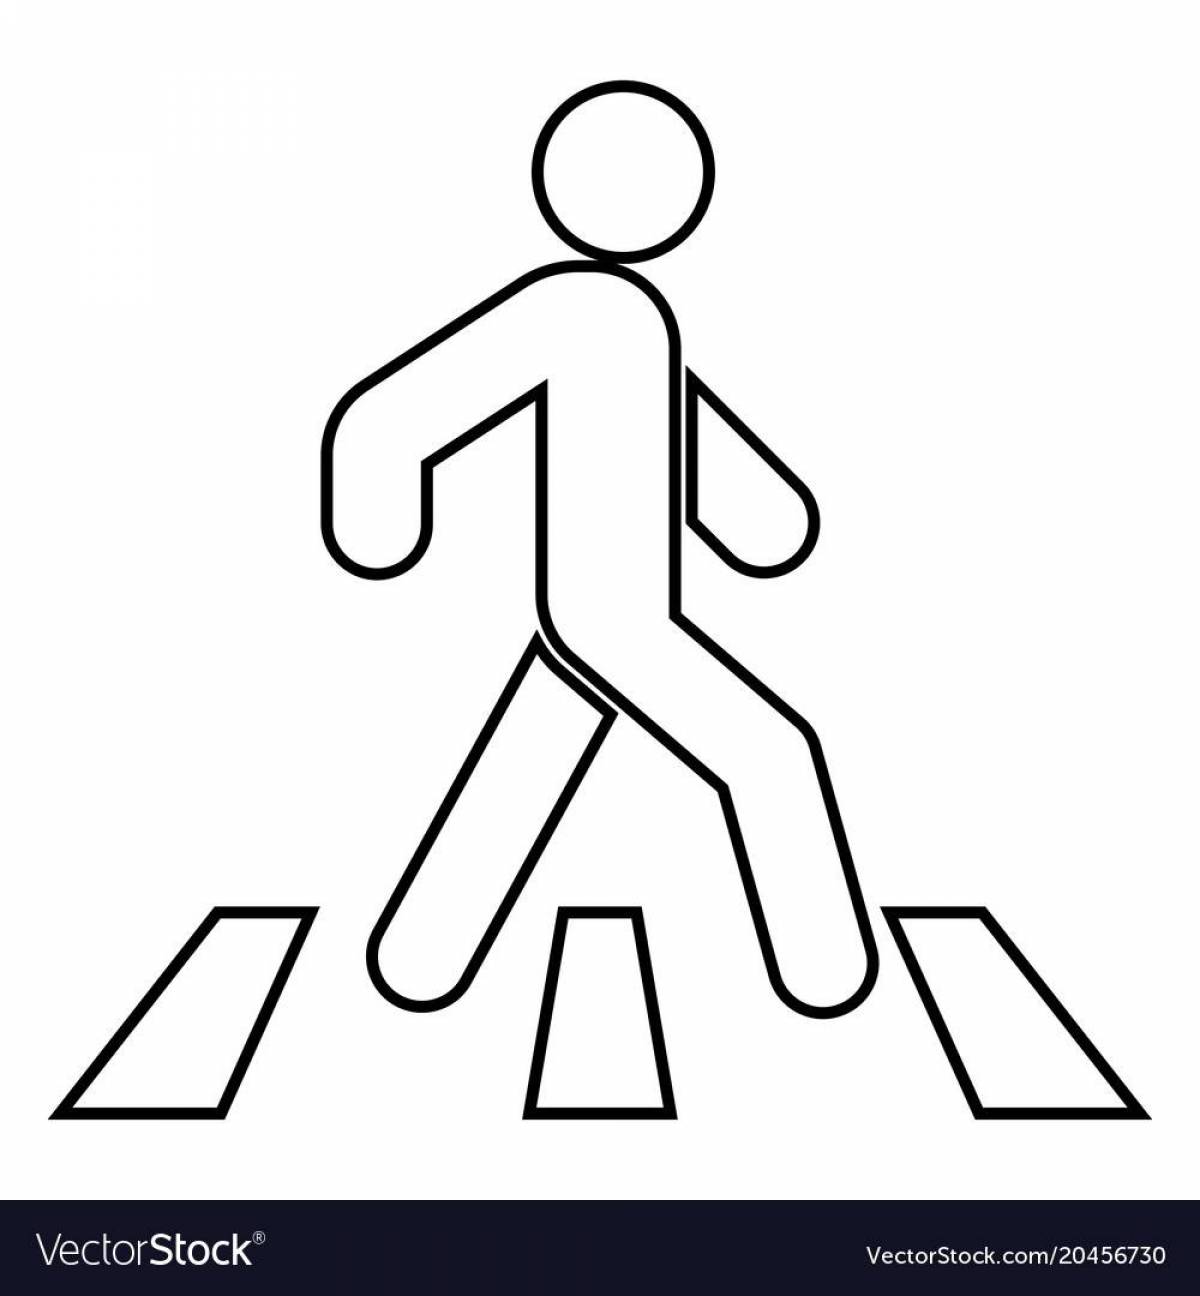 Exciting crosswalk coloring page